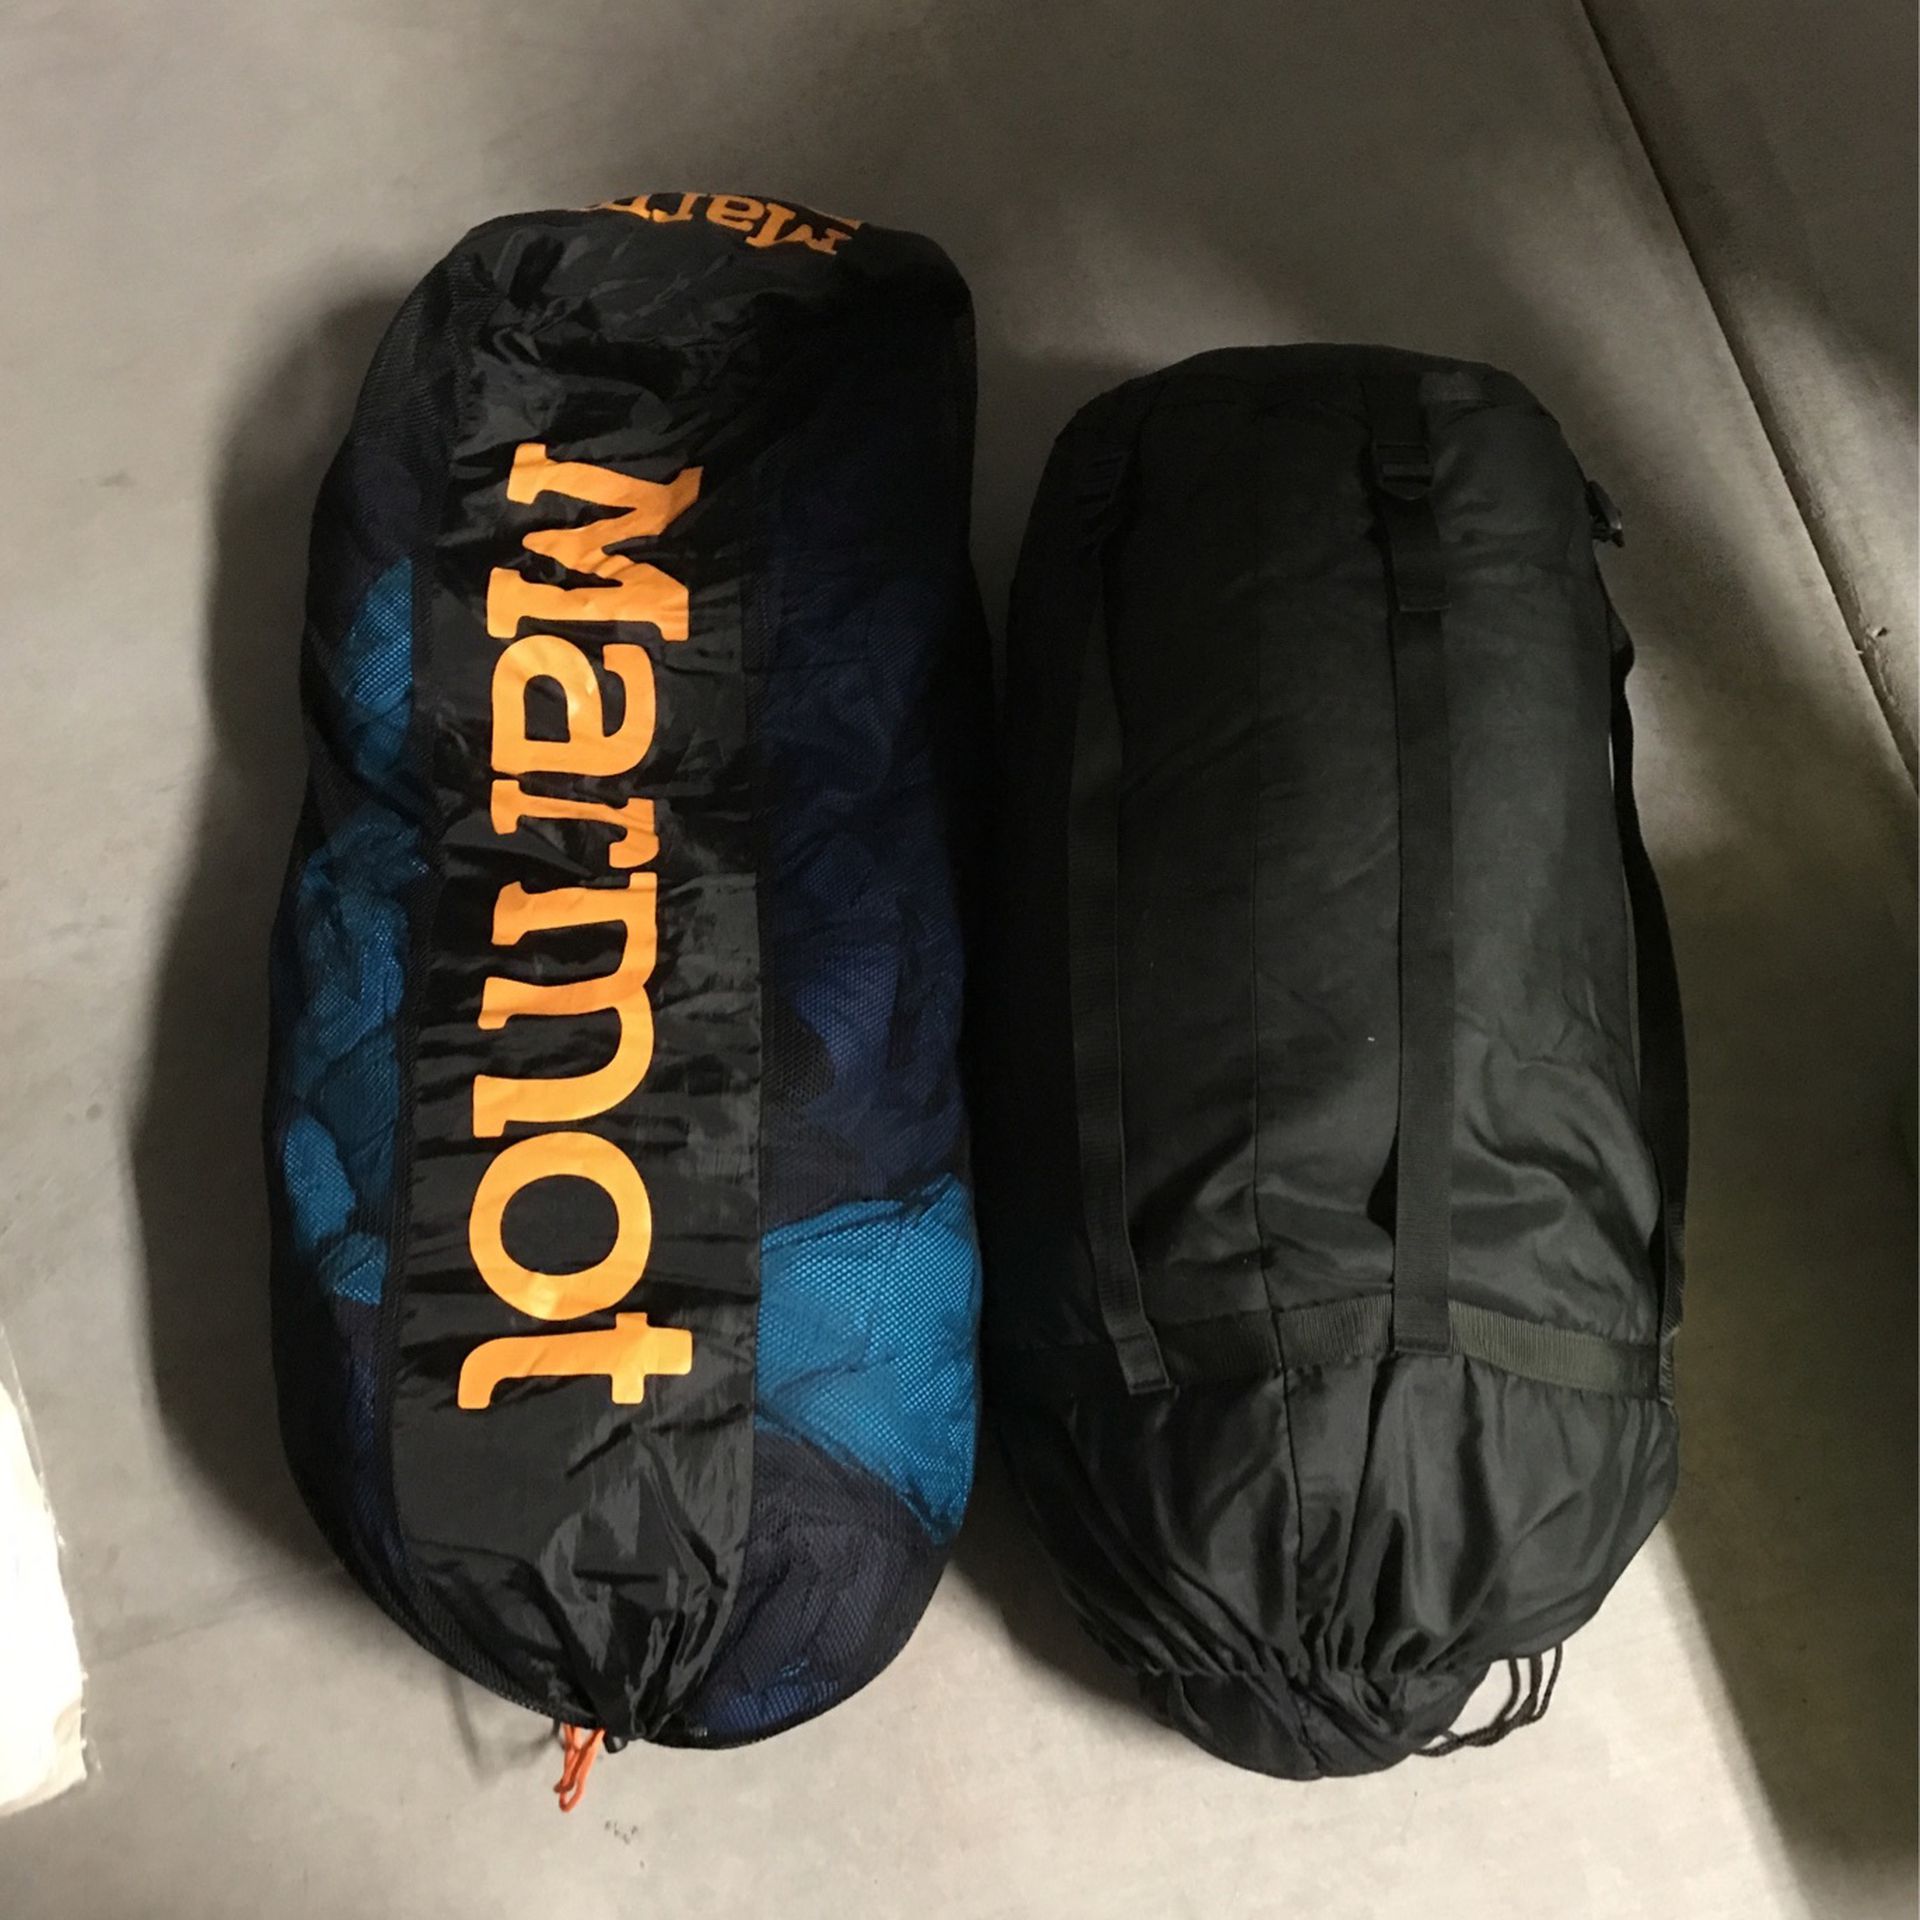 Adult Size Camping Sleeping Bags